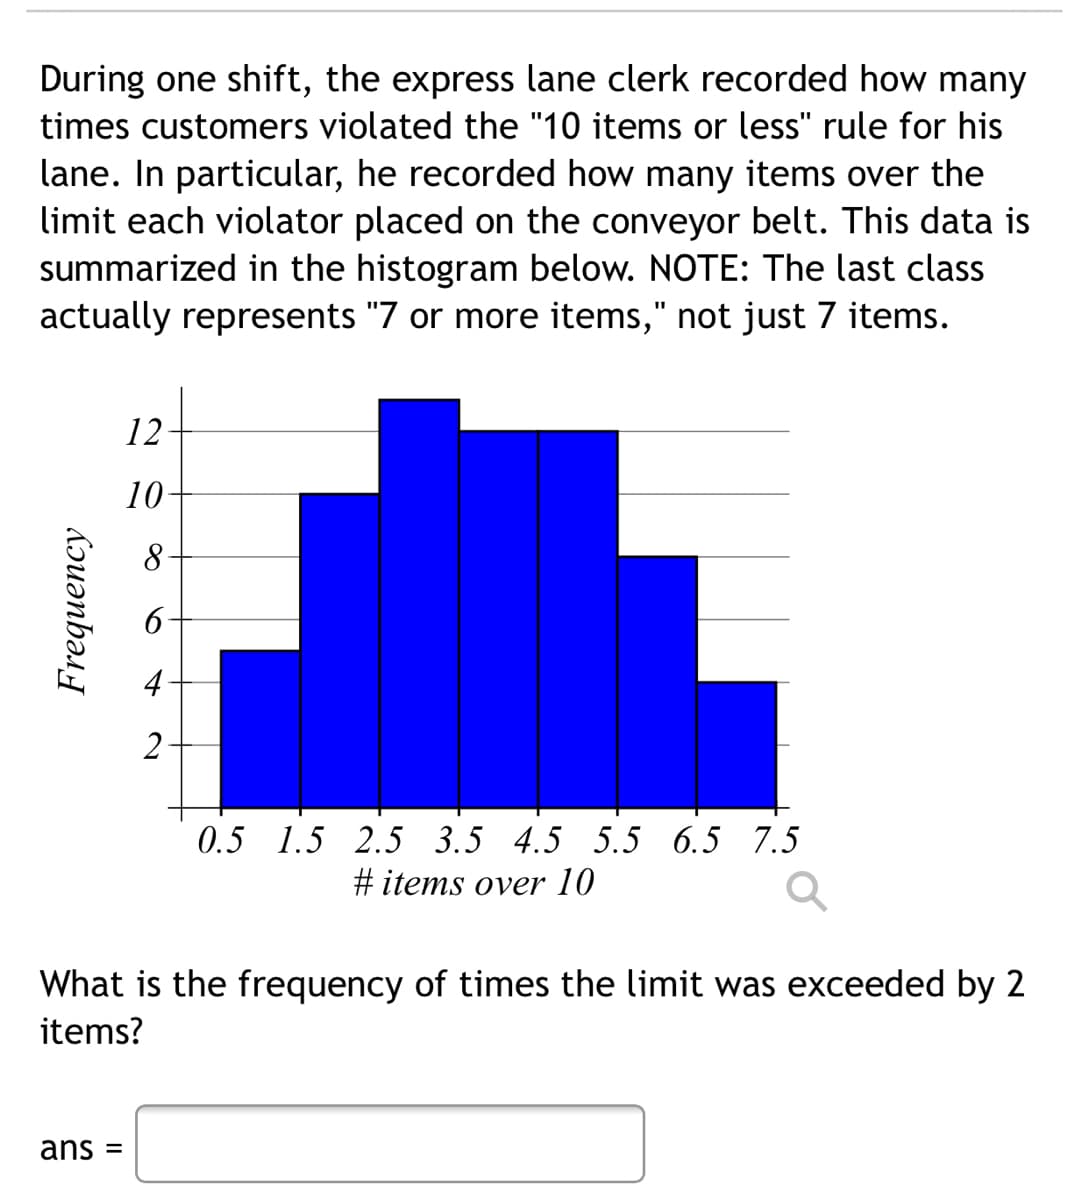 During one shift, the express lane clerk recorded how many
times customers violated the "10 items or less" rule for his
lane. In particular, he recorded how many items over the
limit each violator placed on the conveyor belt. This data is
summarized in the histogram below. NOTE: The last class
actually represents "7 or more items," not just 7 items.
12
10-
4
2
0.5 1.5 2.5 3.5 4.5 5.5 6.5 7.5
#items over 10
What is the frequency of times the limit was exceeded by 2
items?
ans =
Frequency
6